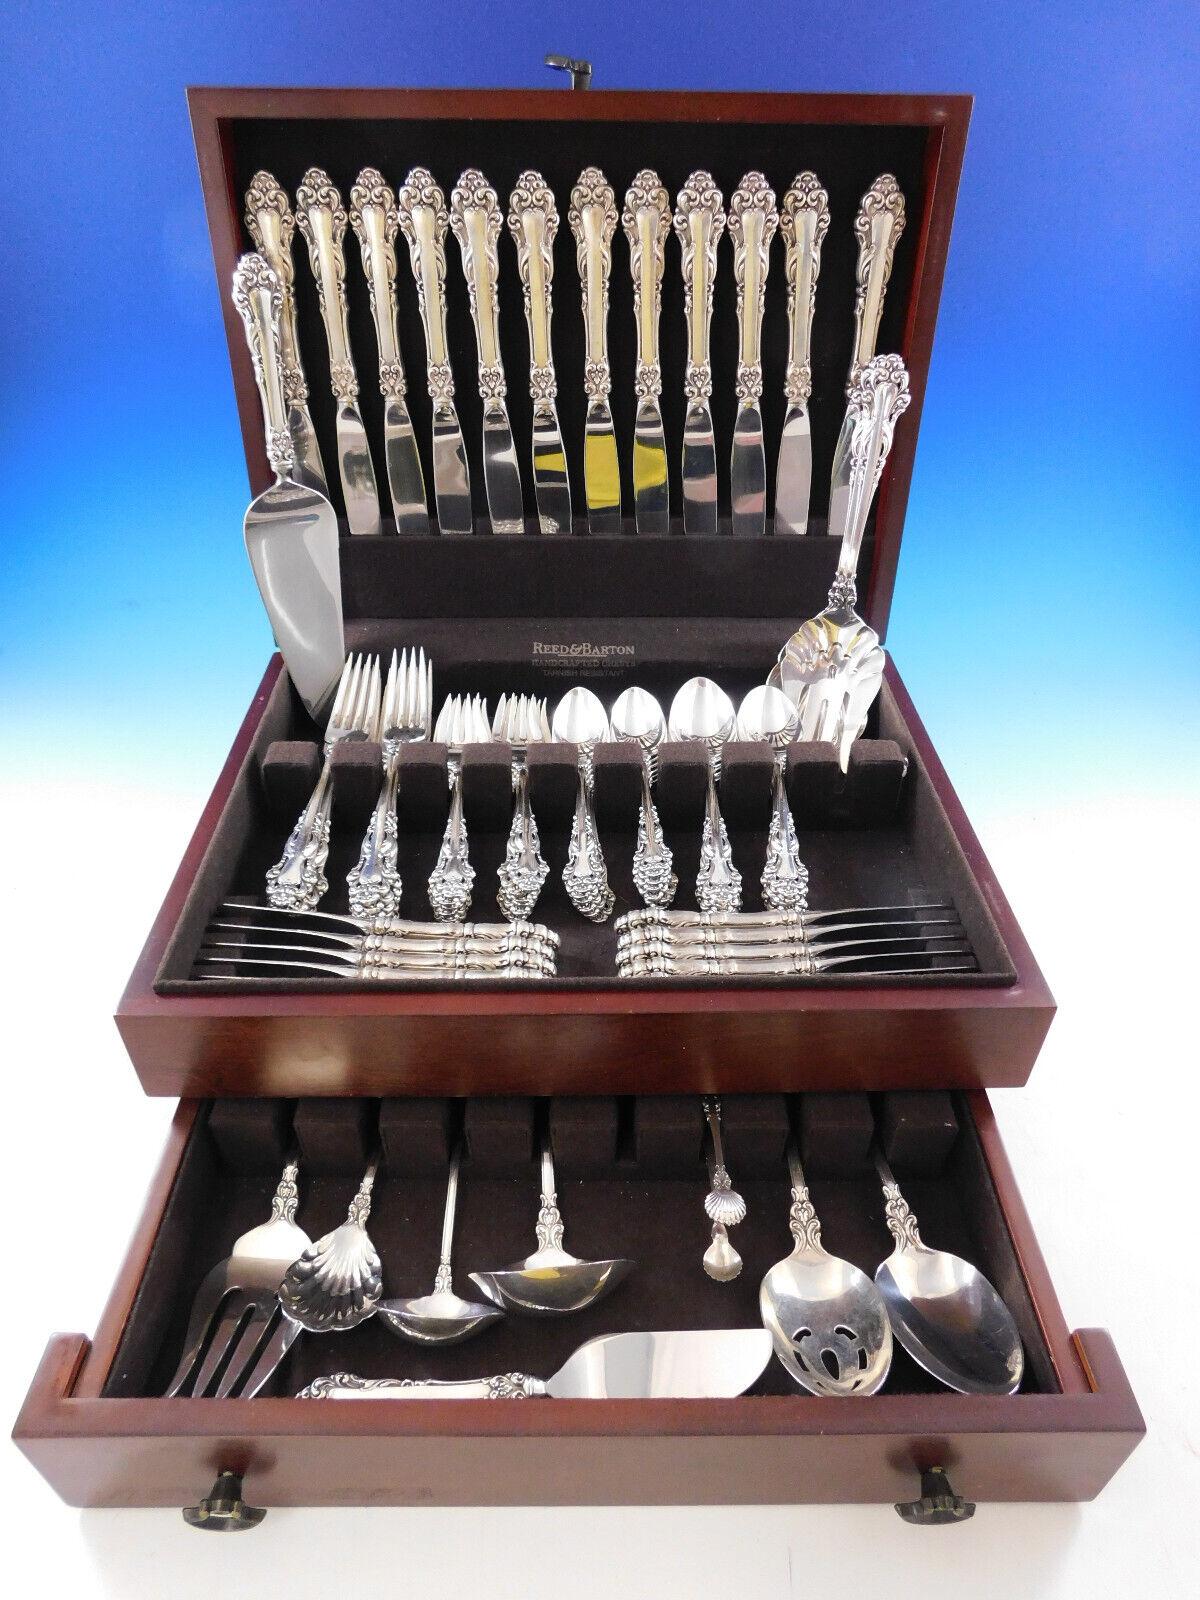 Scarce dinner size Grande Renaissance by Reed and Barton sterling silver flatware set - 83 pieces. This set includes:

12 Dinner Size Knives, 9 3/4